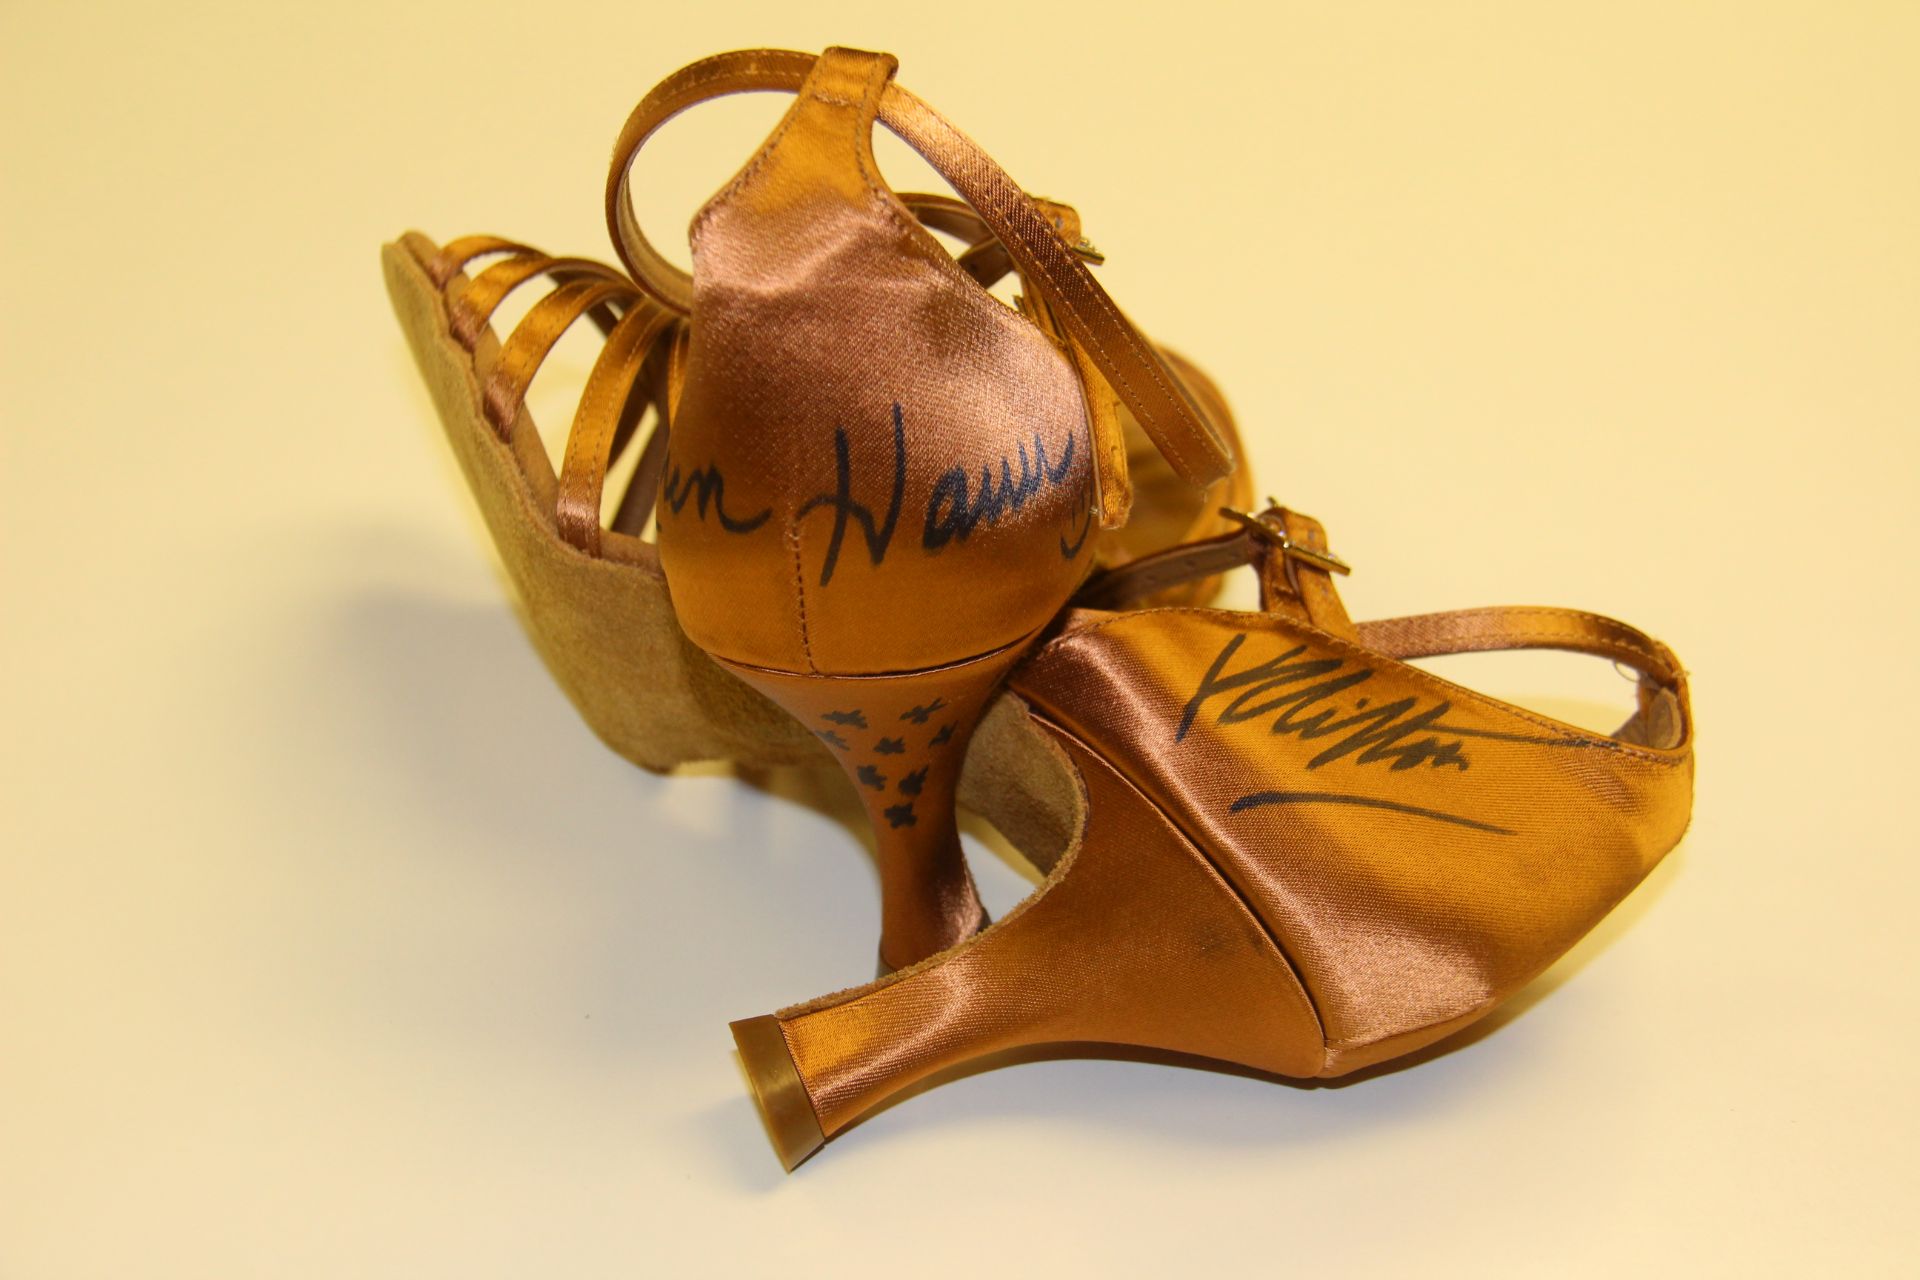 Strictly Come Dancing shoes - copper satin shoes signed by Karen Clifton-Hauer - Image 3 of 3